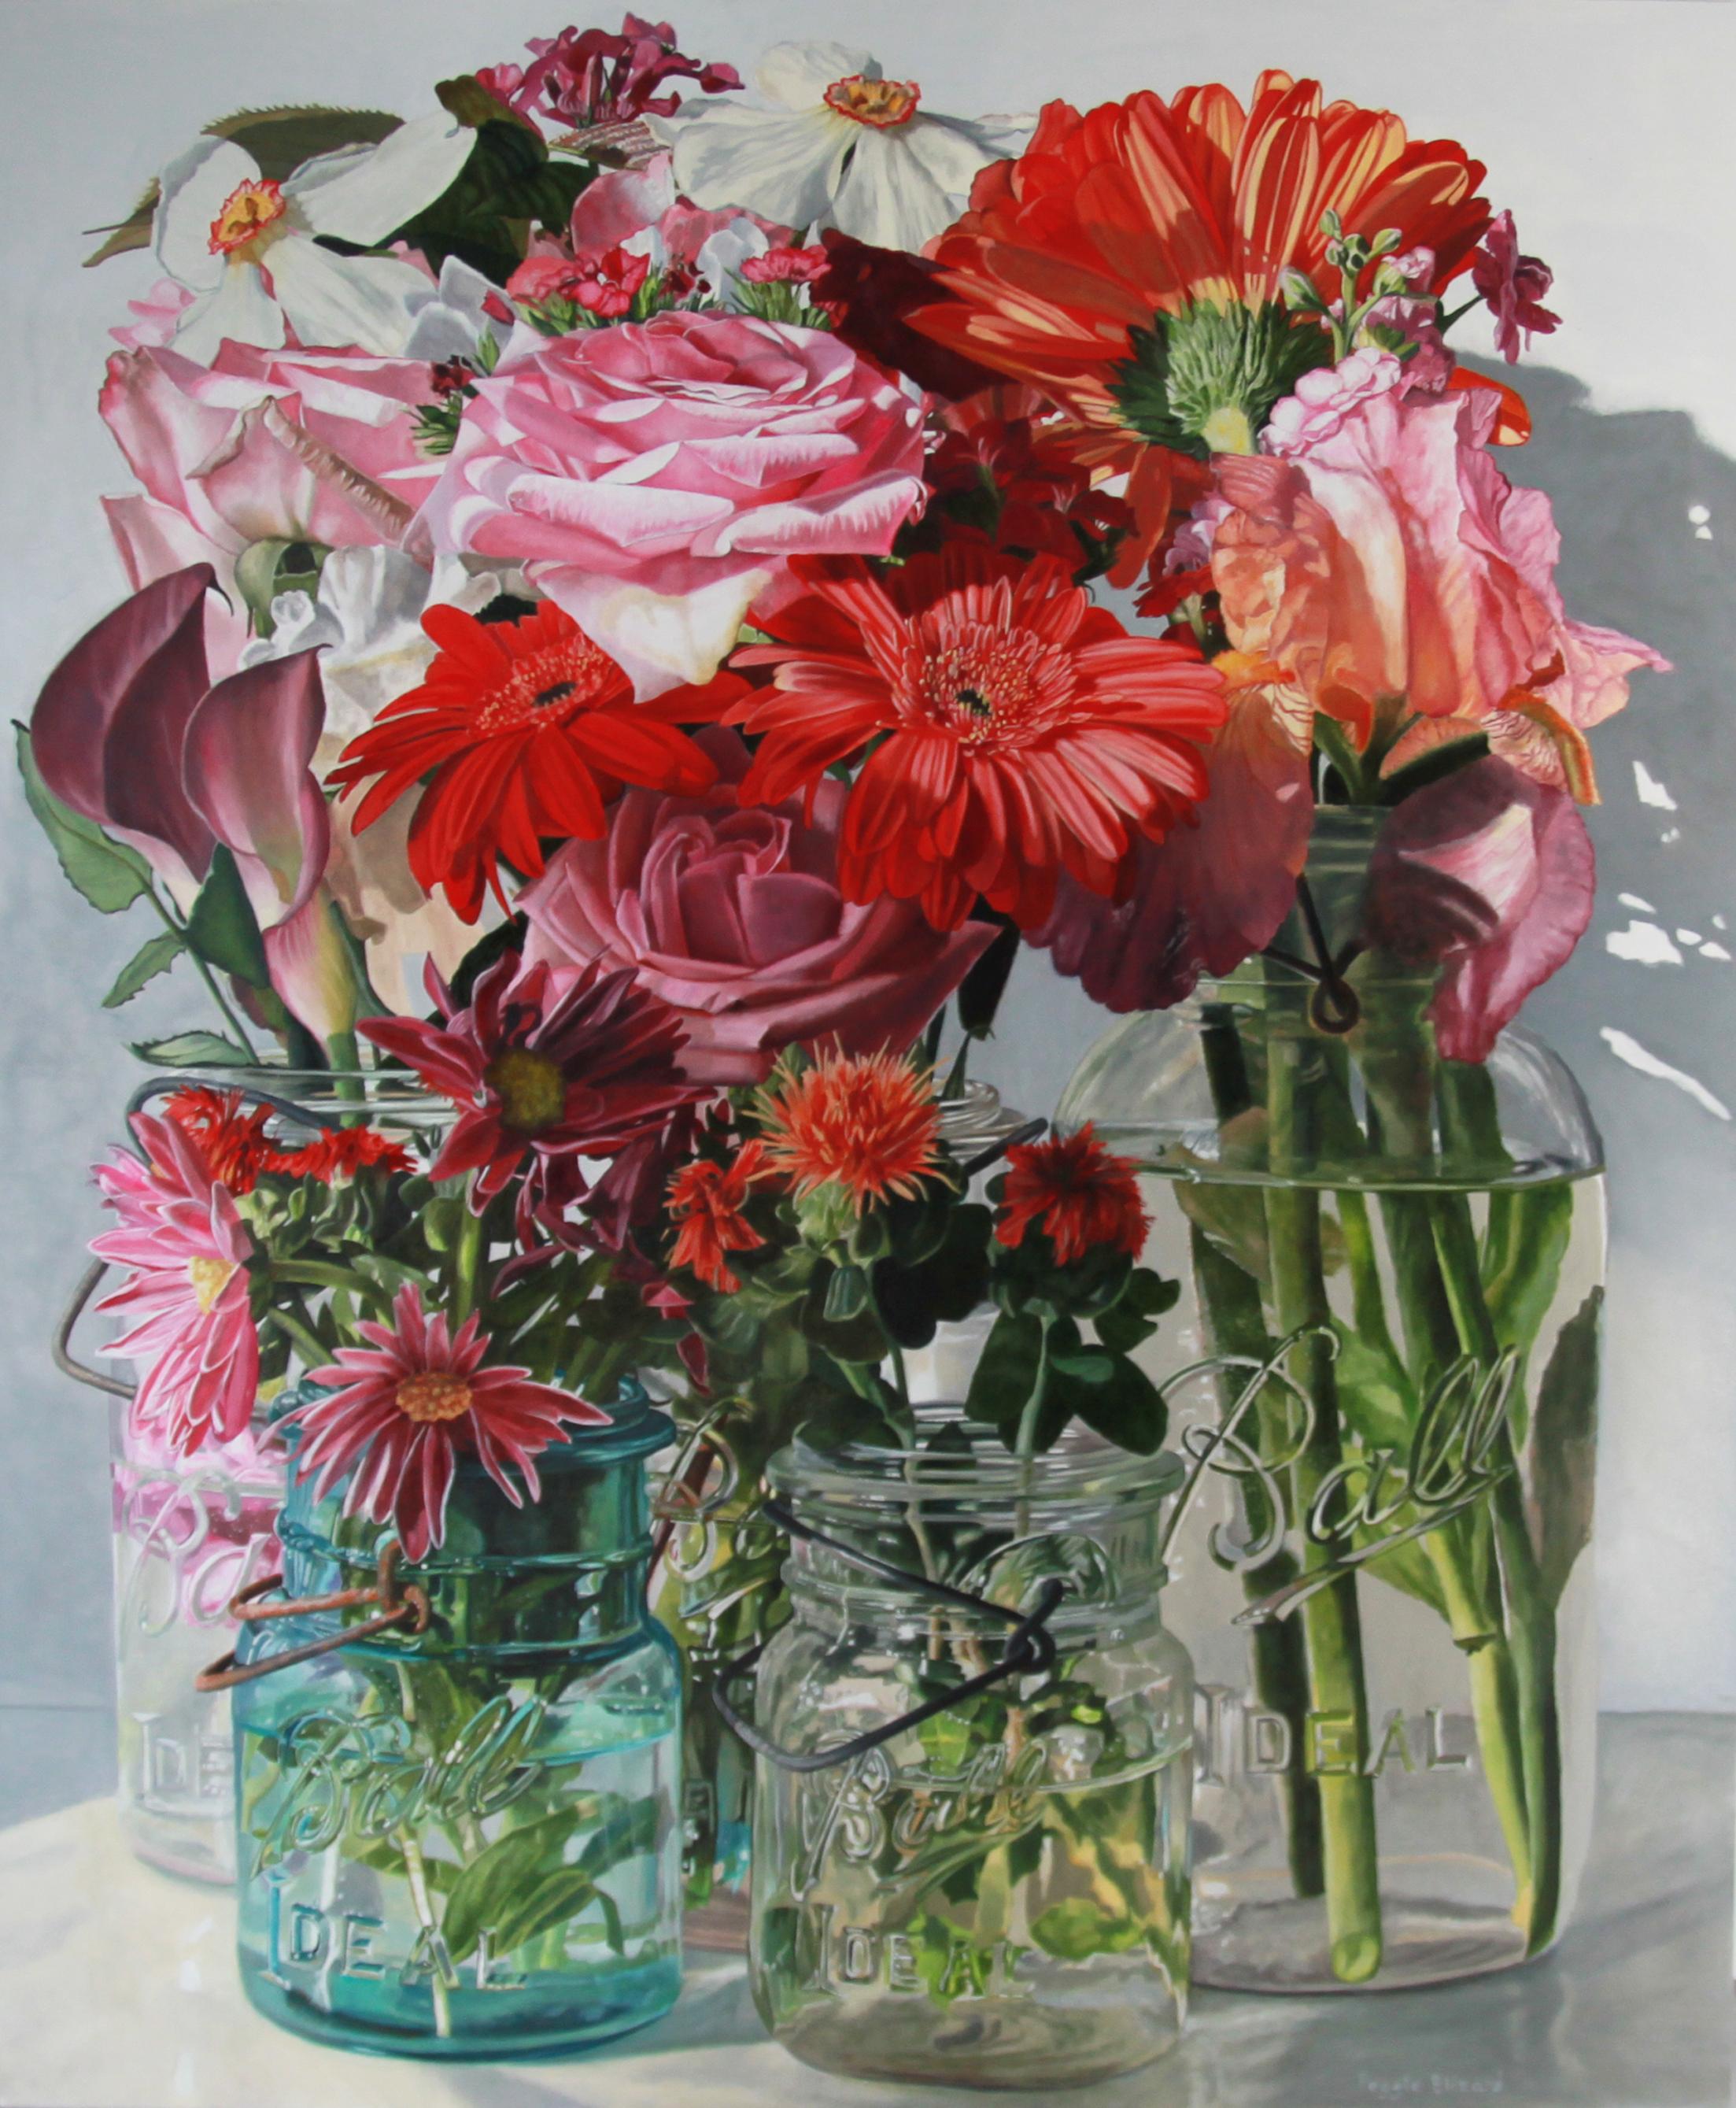 Five Ball Jars with Flowers